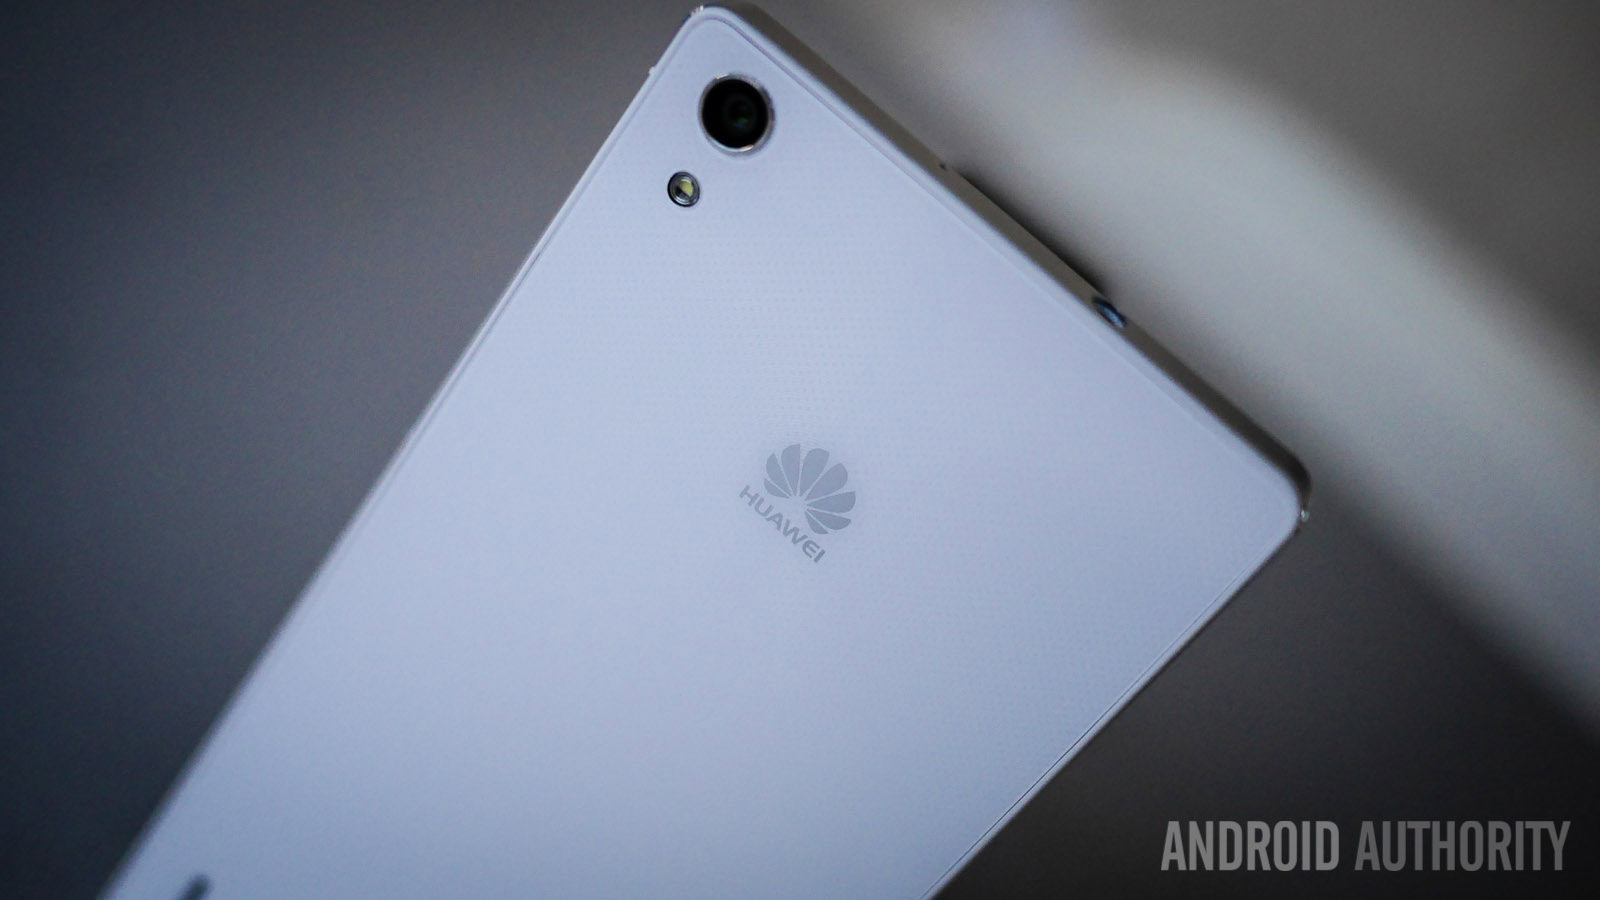 shuttle Treinstation Sta in plaats daarvan op HUAWEI Ascend P7 specs, features - what you need to know